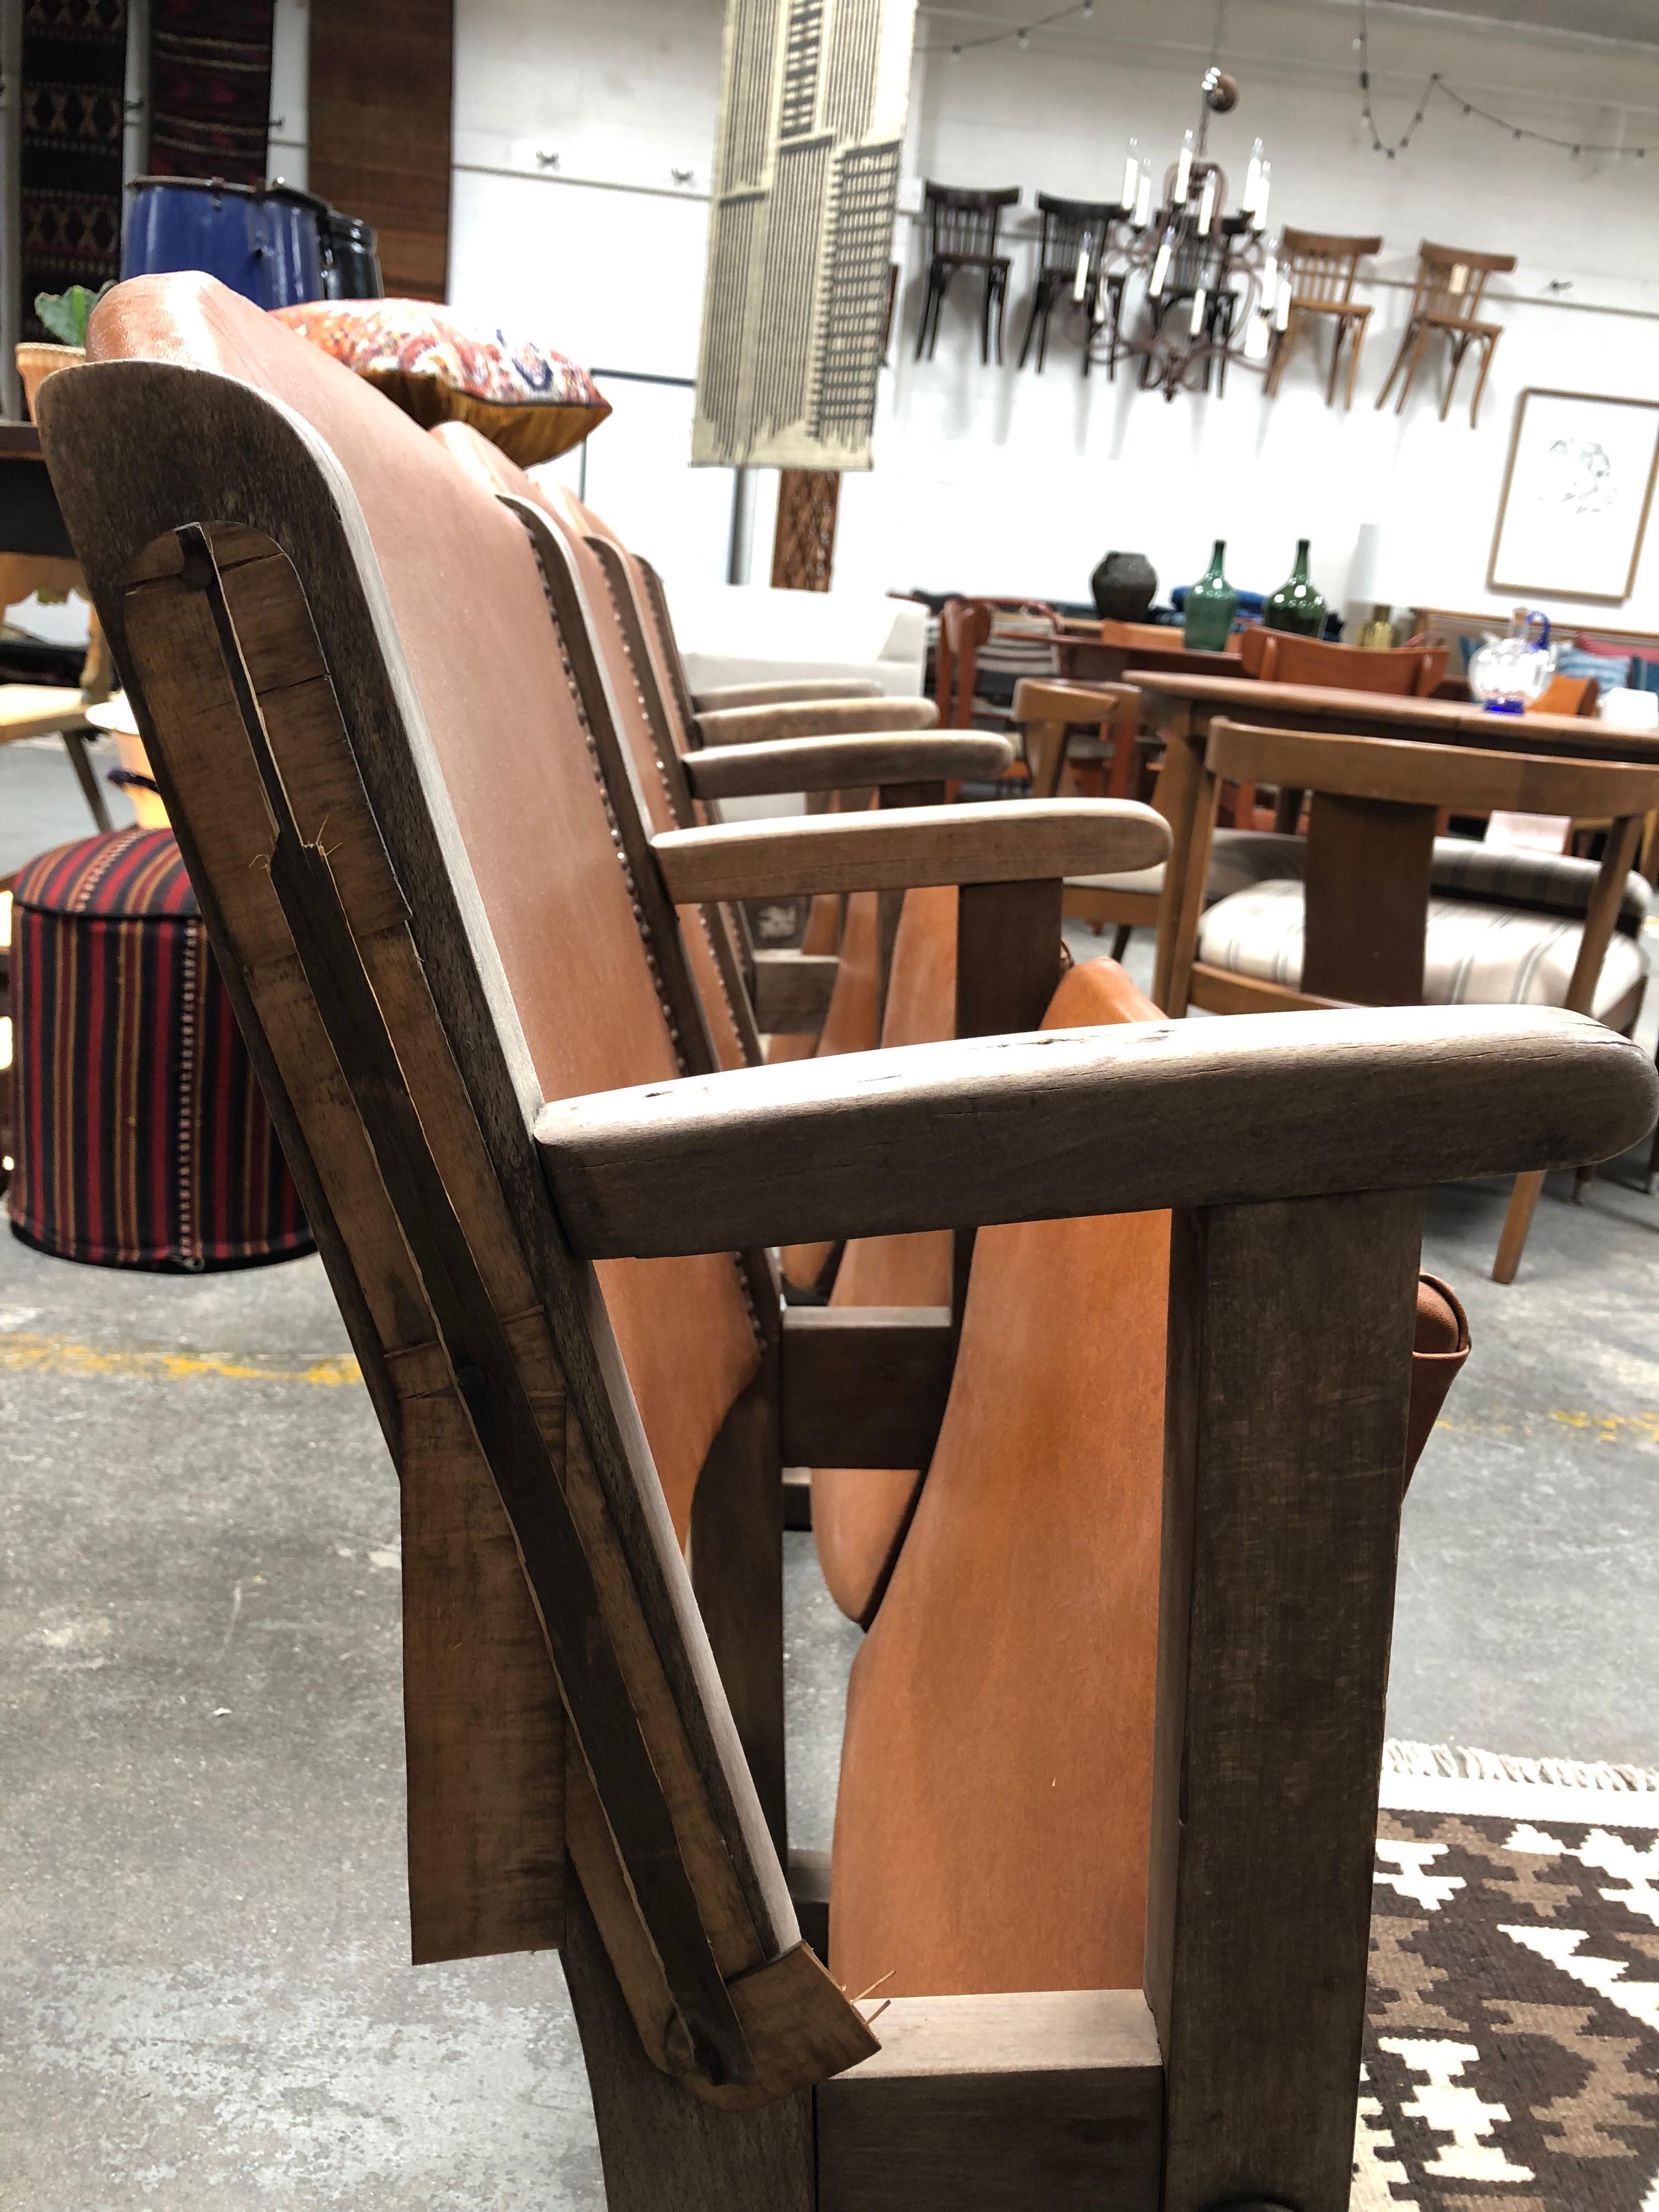 Caramel colored leather theater seats. Accented with studding along the leather seat back and set in wooden seat frames. All four chairs connected through wooden frame, in working condition, and set in soft leather. 

Dimensions of chairs:

Seat